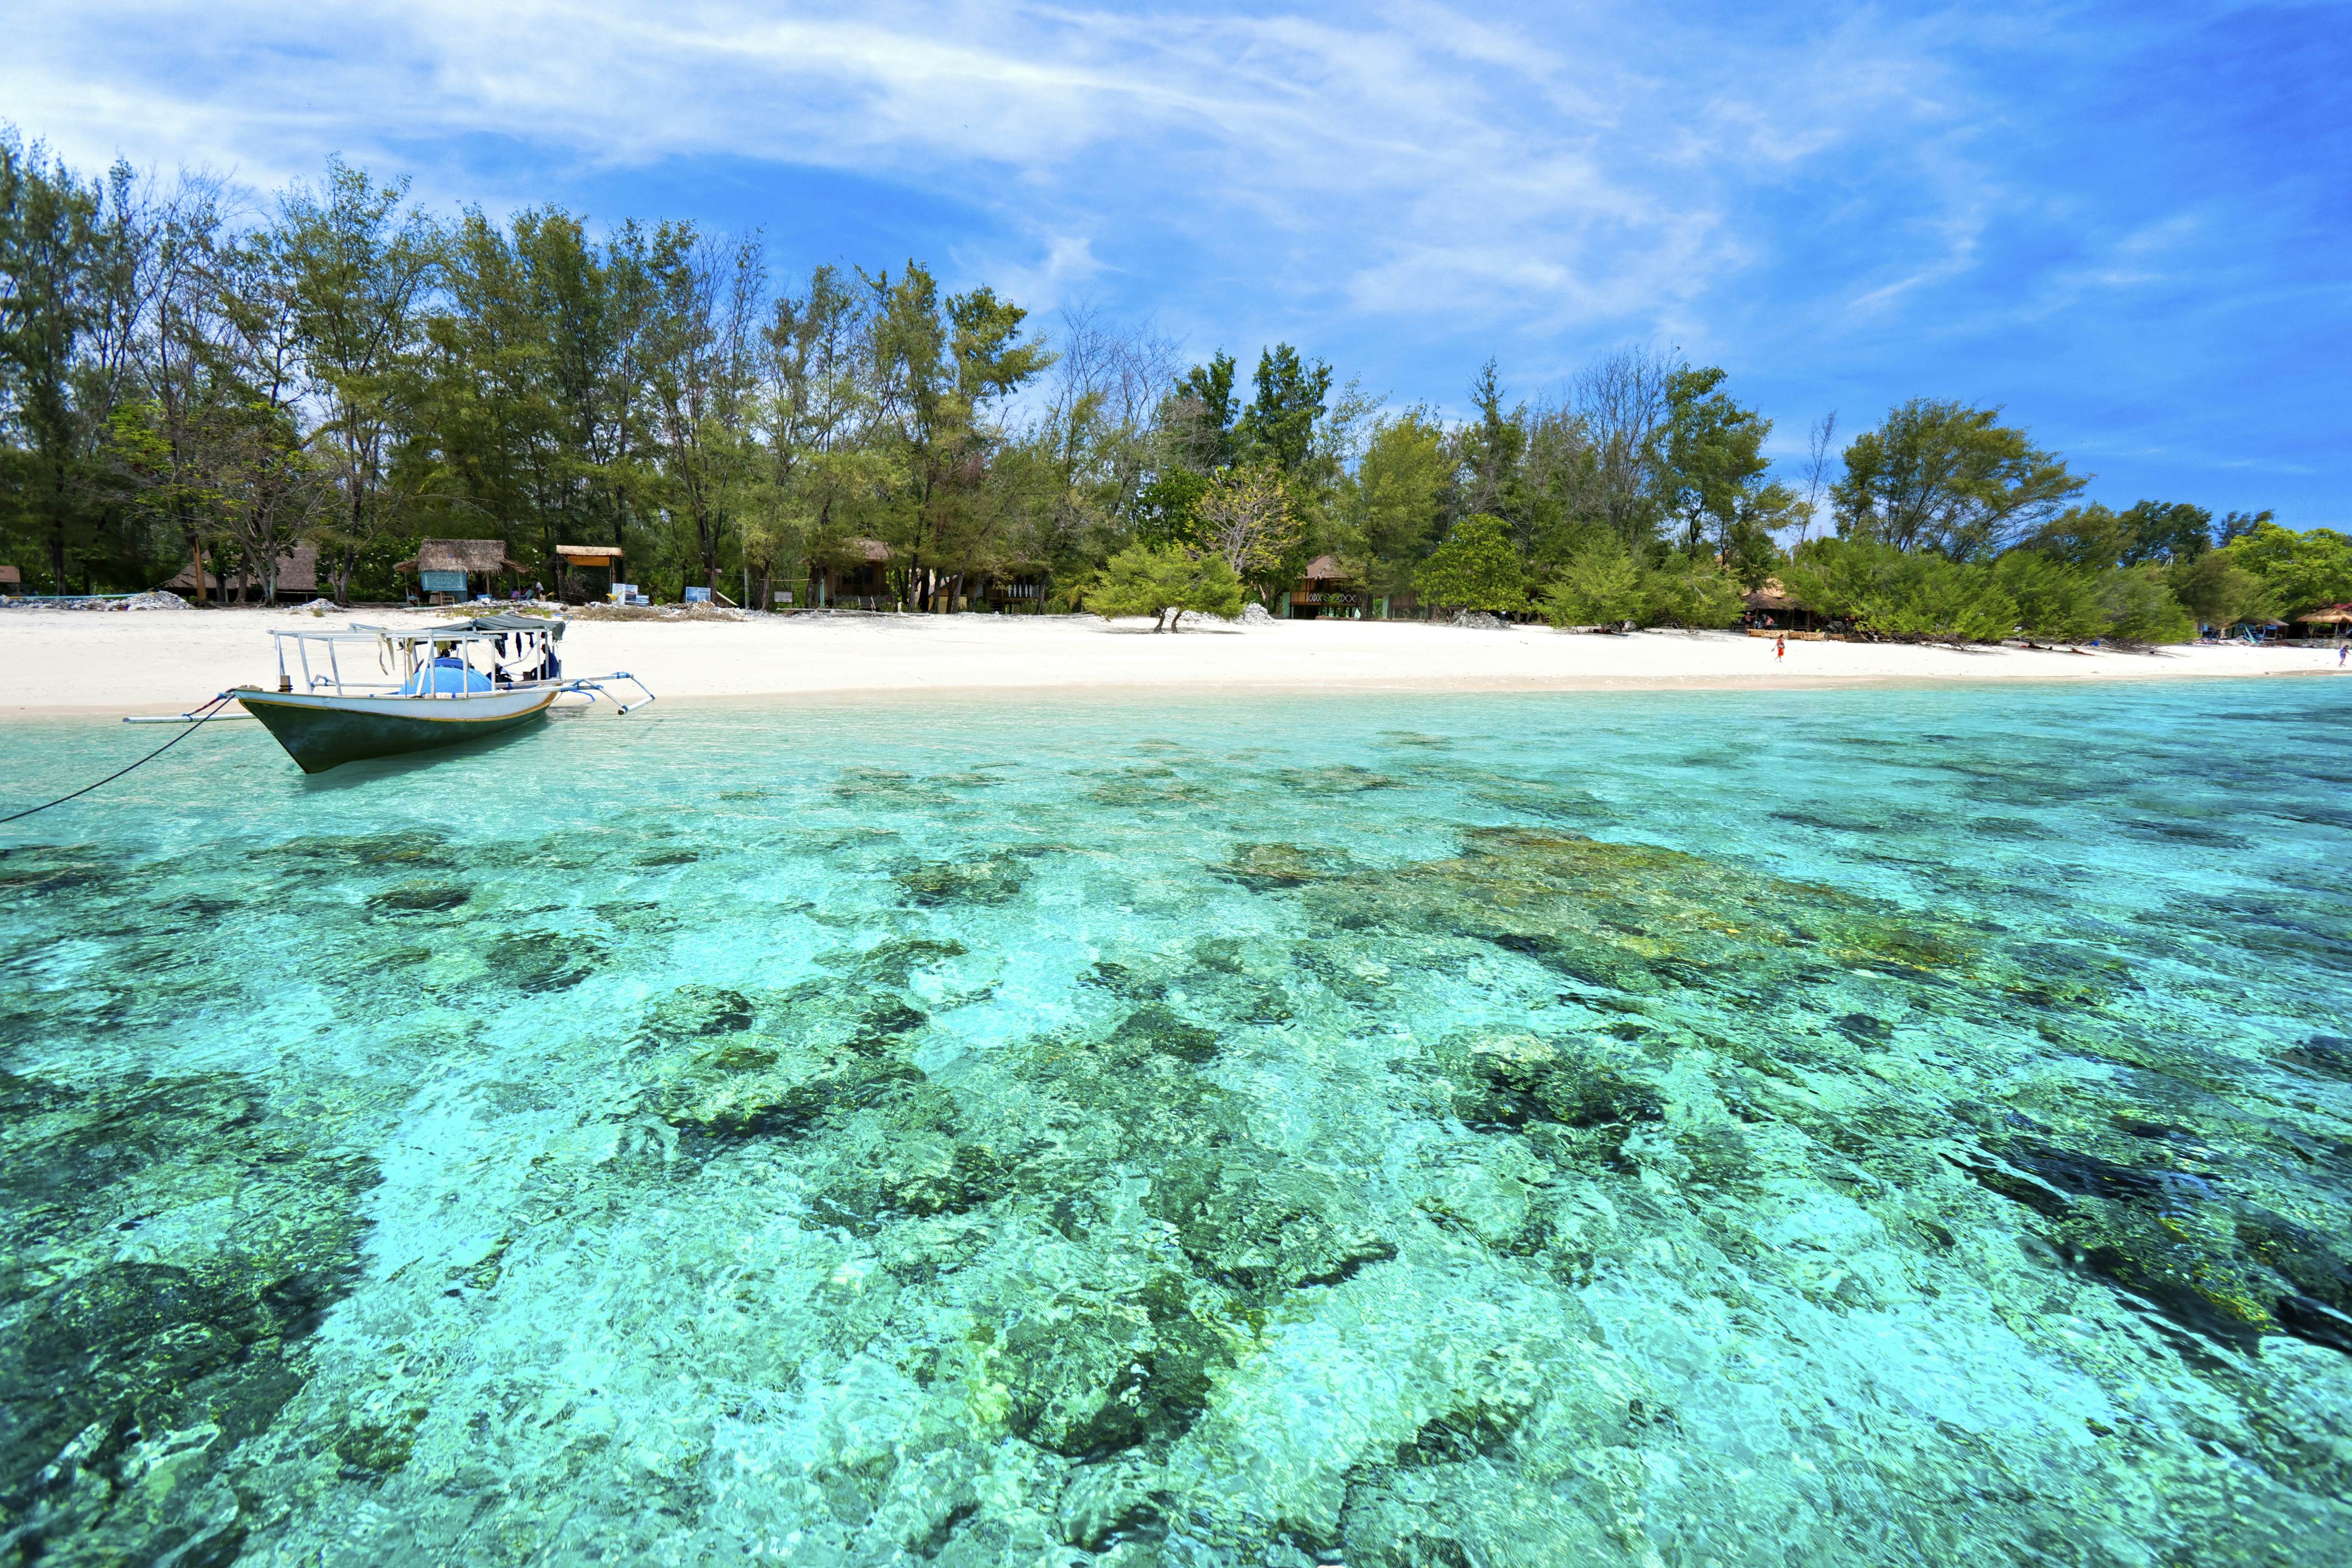 Gili Islands travel - Lonely Planet | Indonesia, Asia